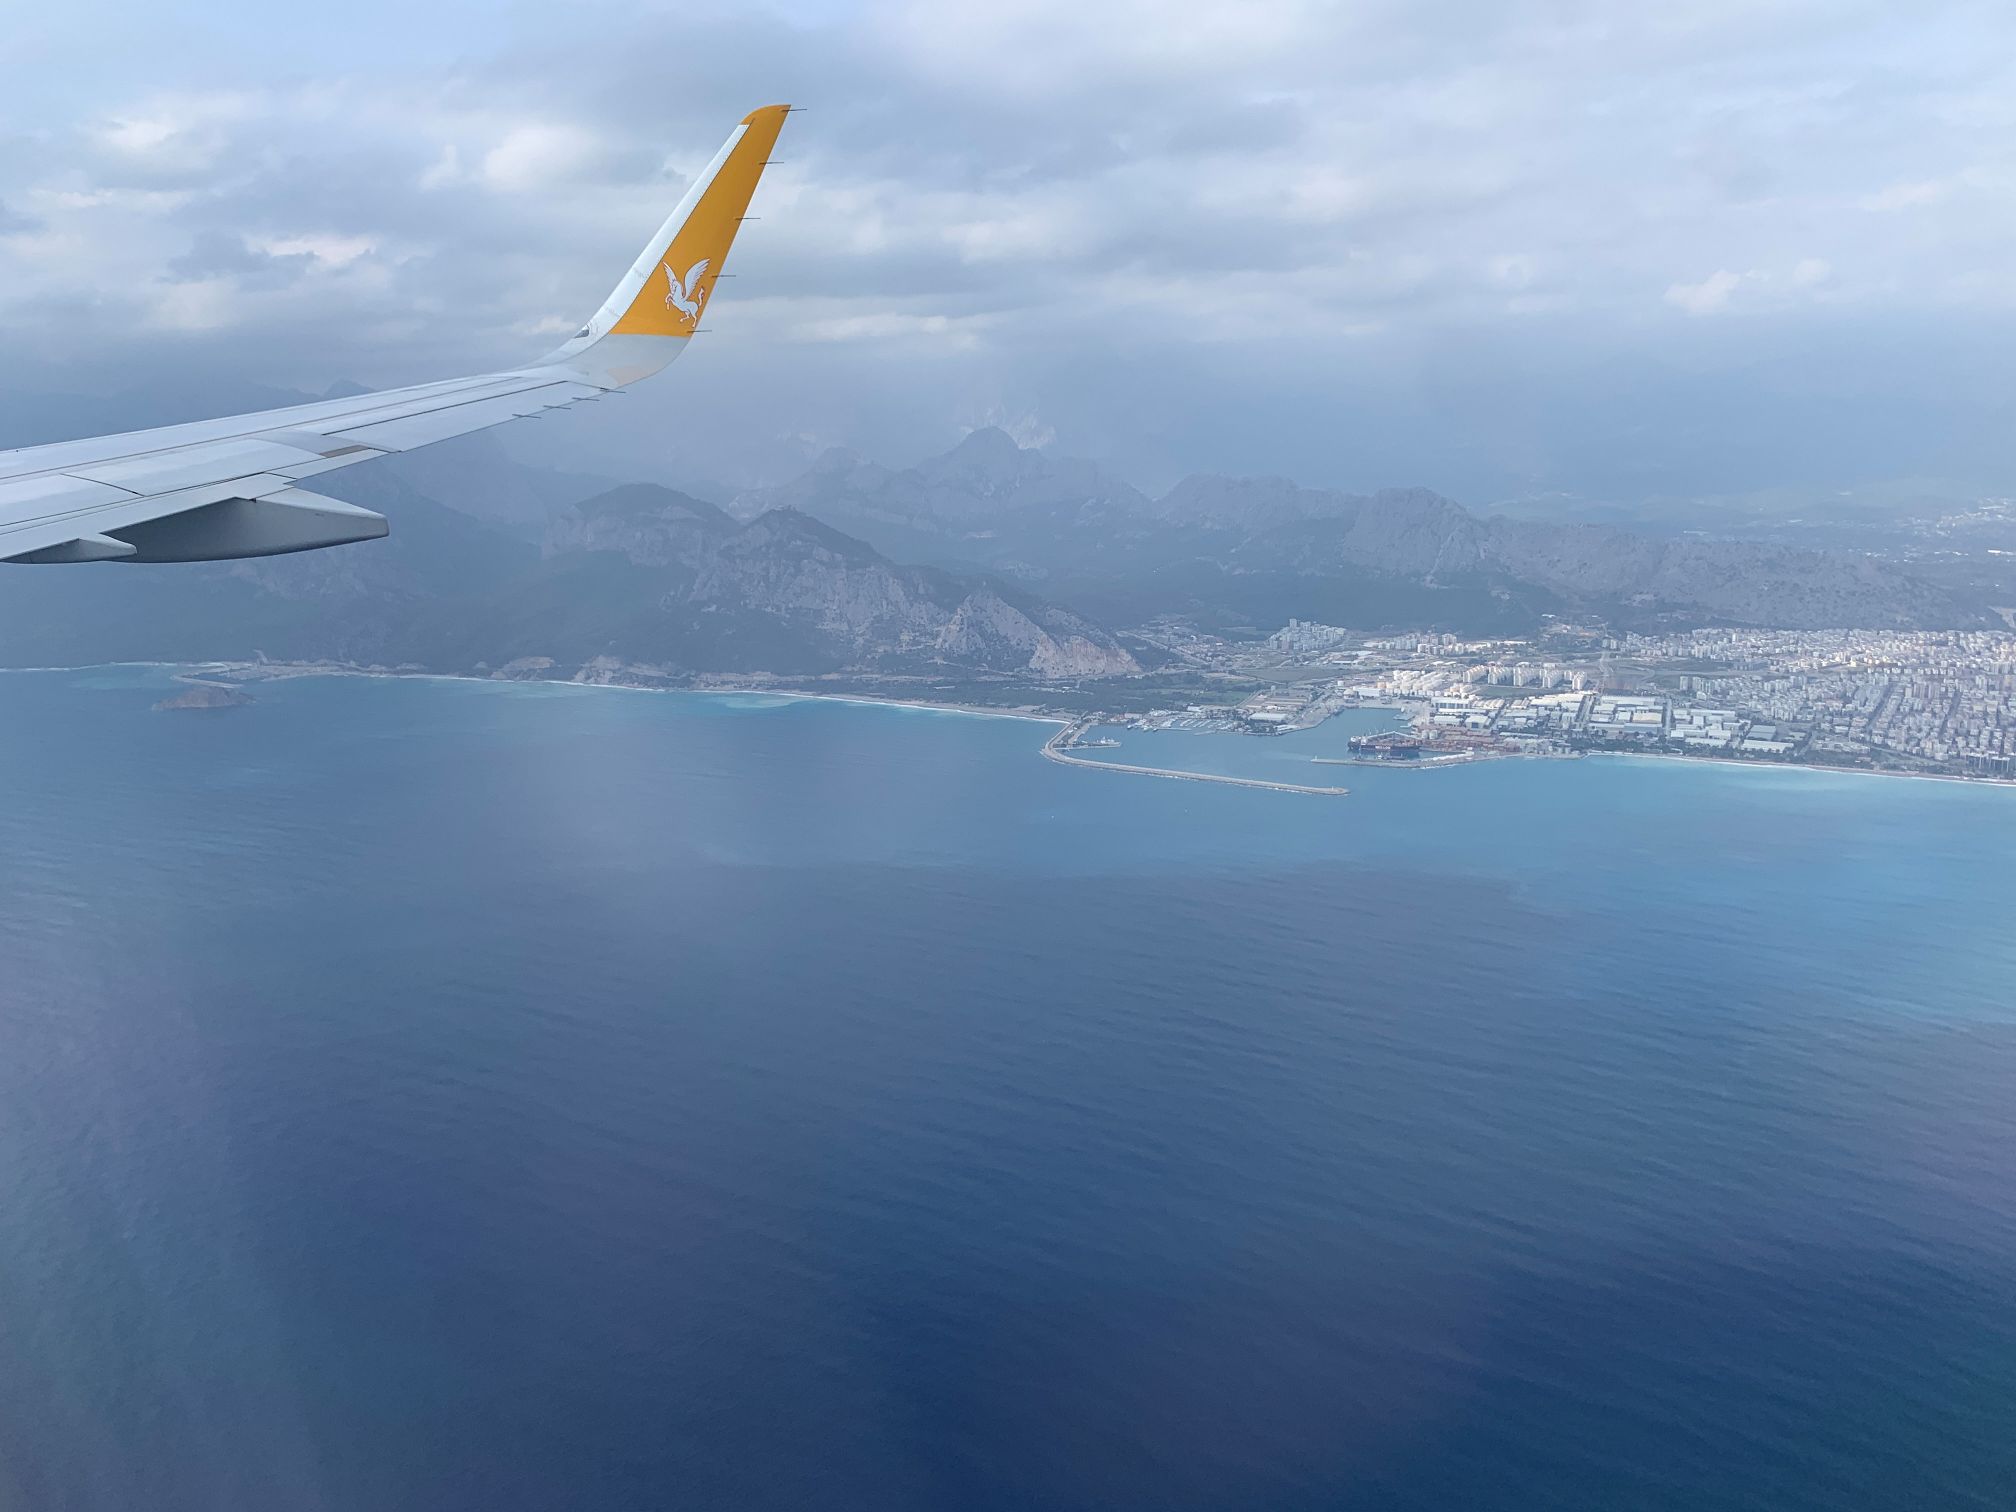 Antalya's coastline as seen from the airplane